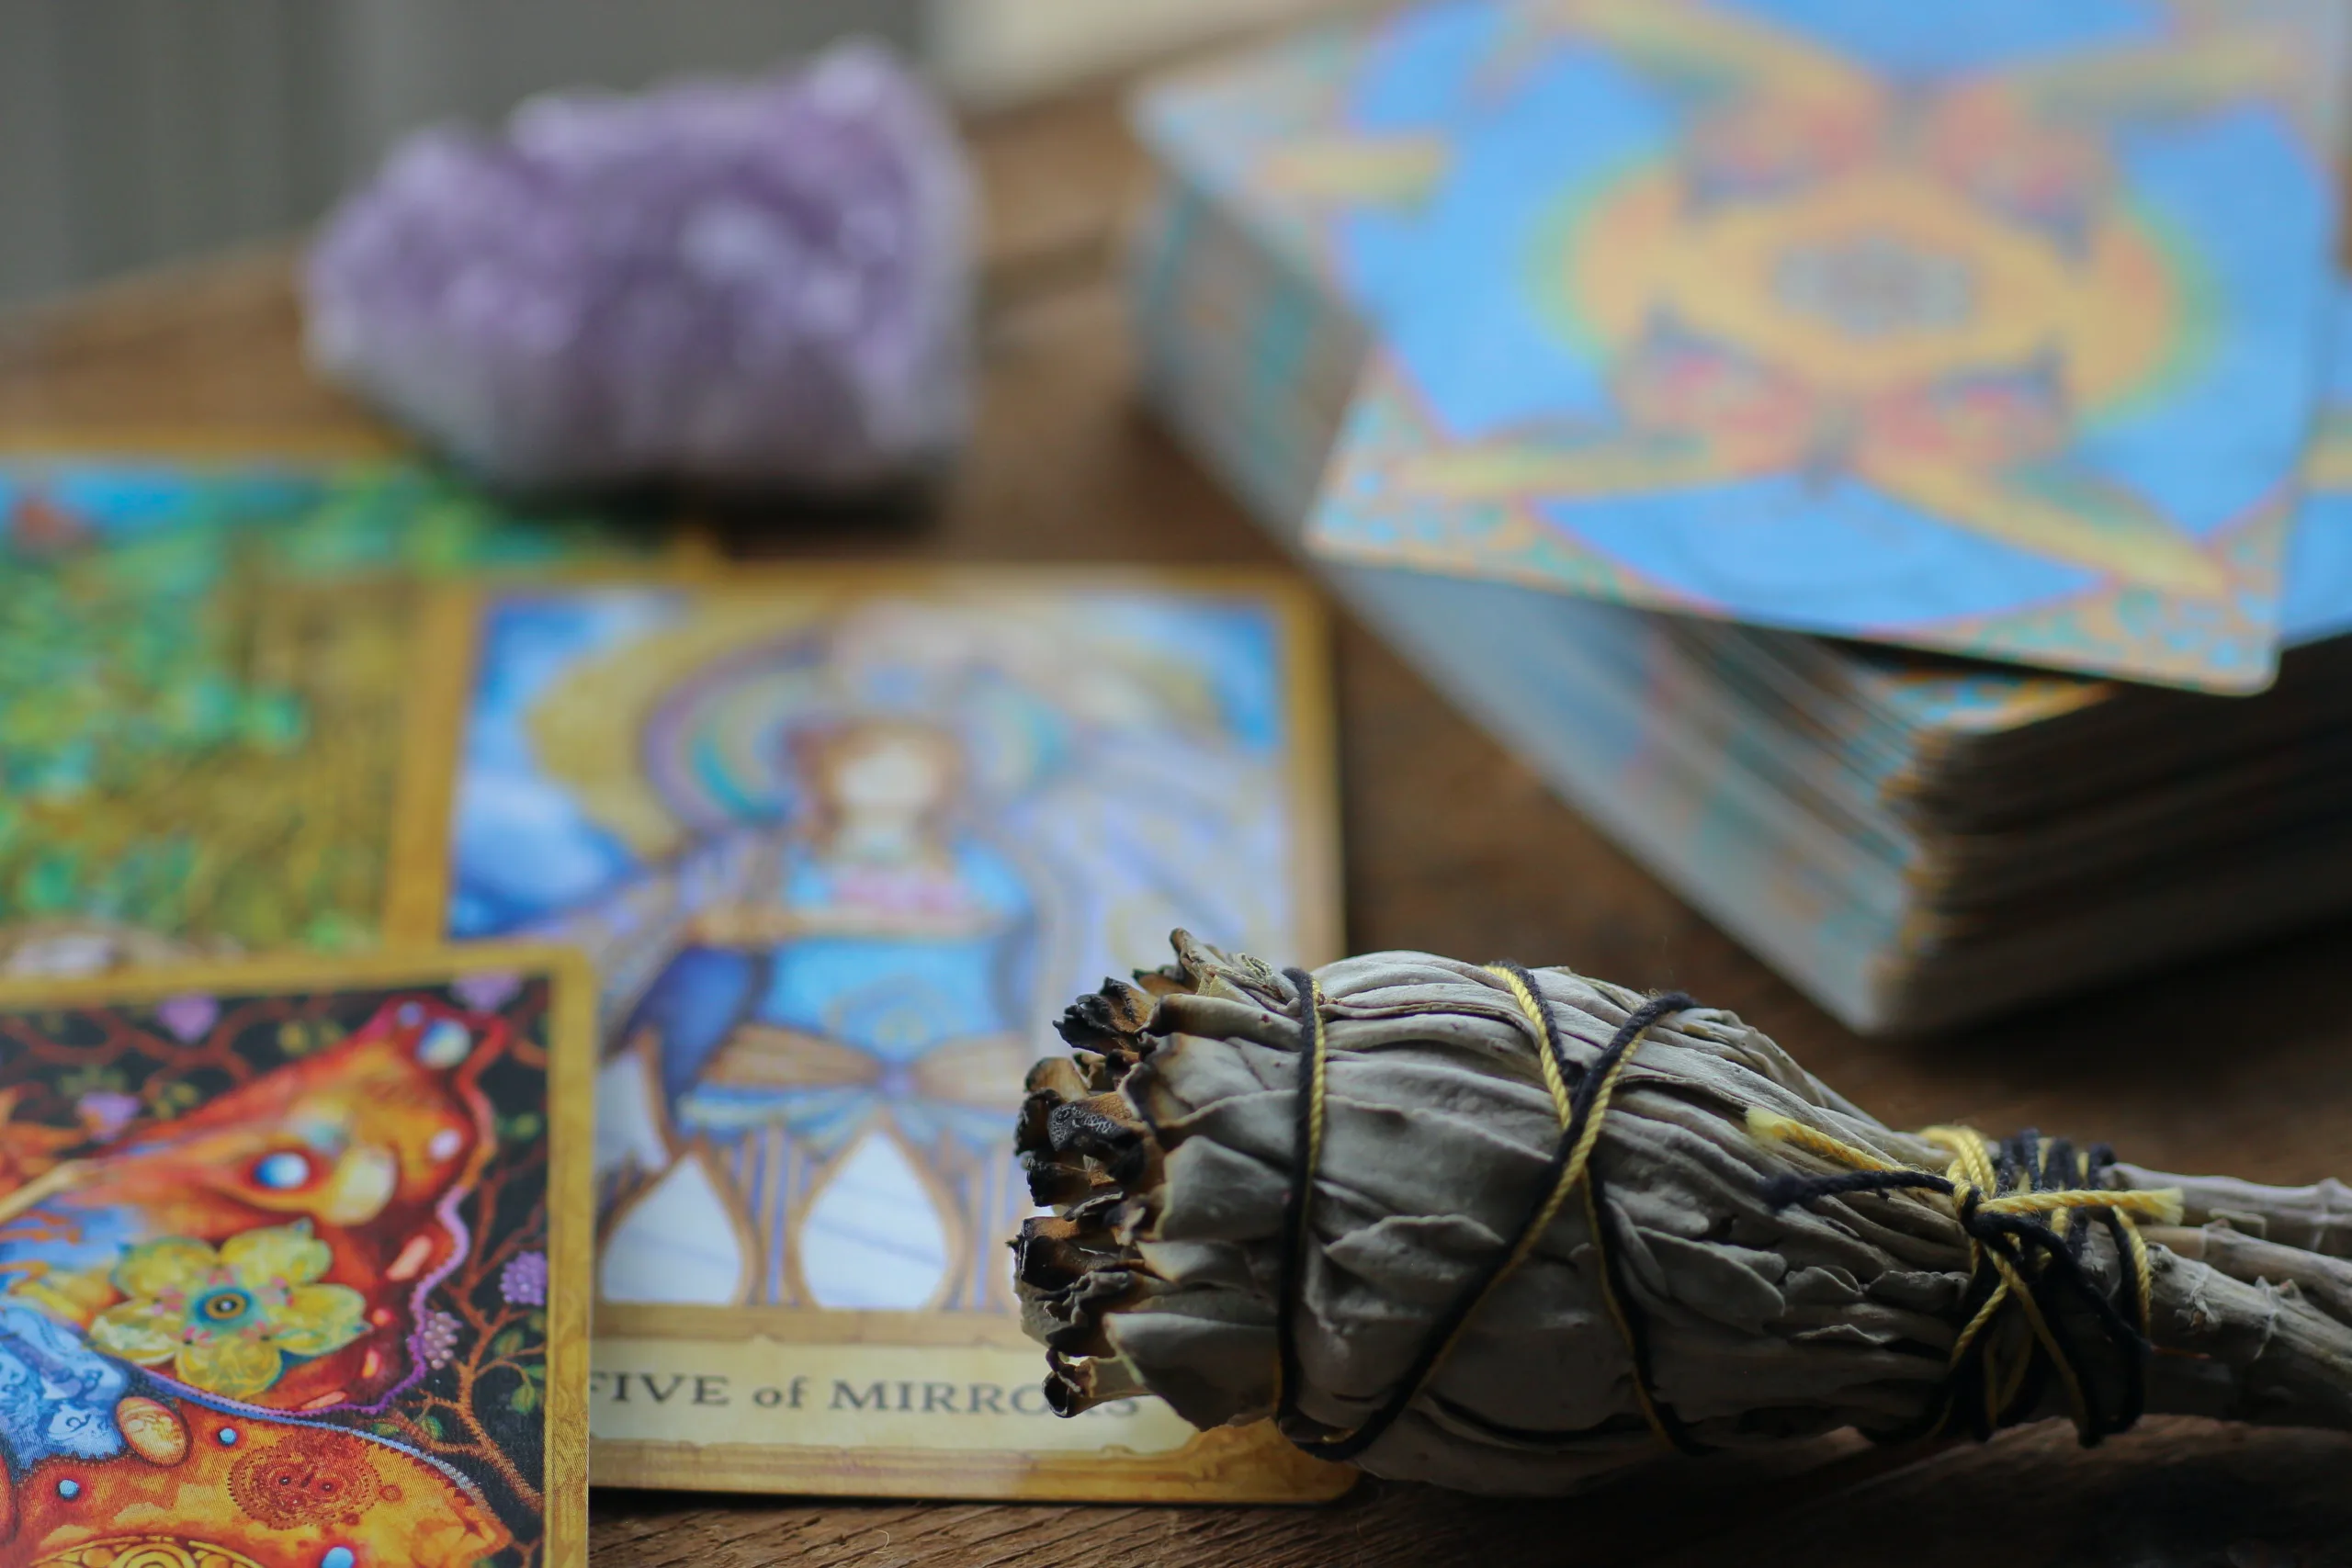 How to publish a tarot deck?